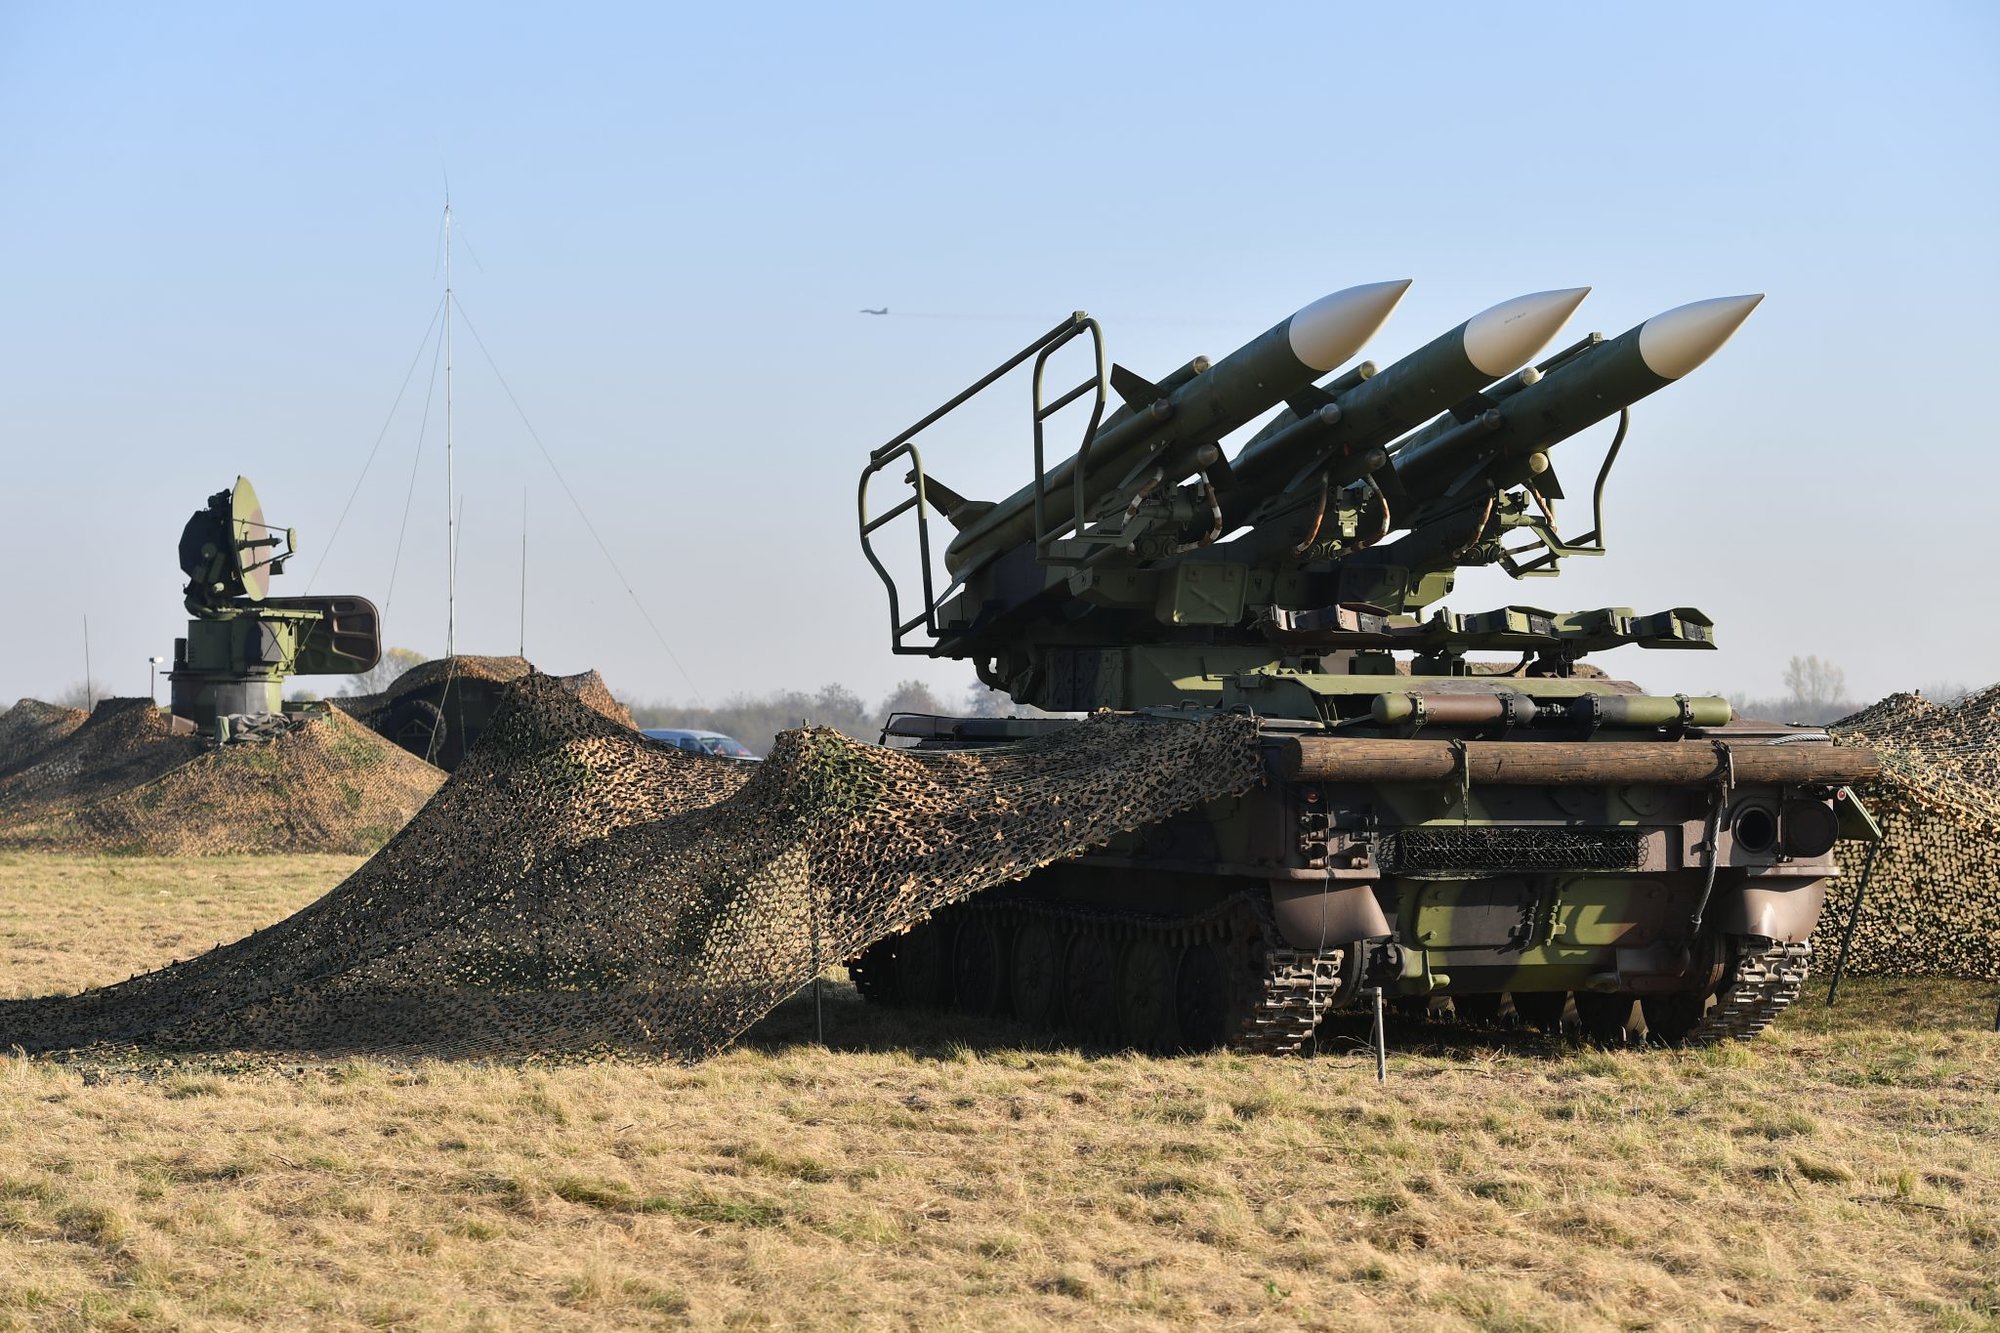 Washington had sought to dissuade Ankara from purchasing and installing the Russian S-400 missile system. Photo courtesy of Serbia’s Ministry of Defense.